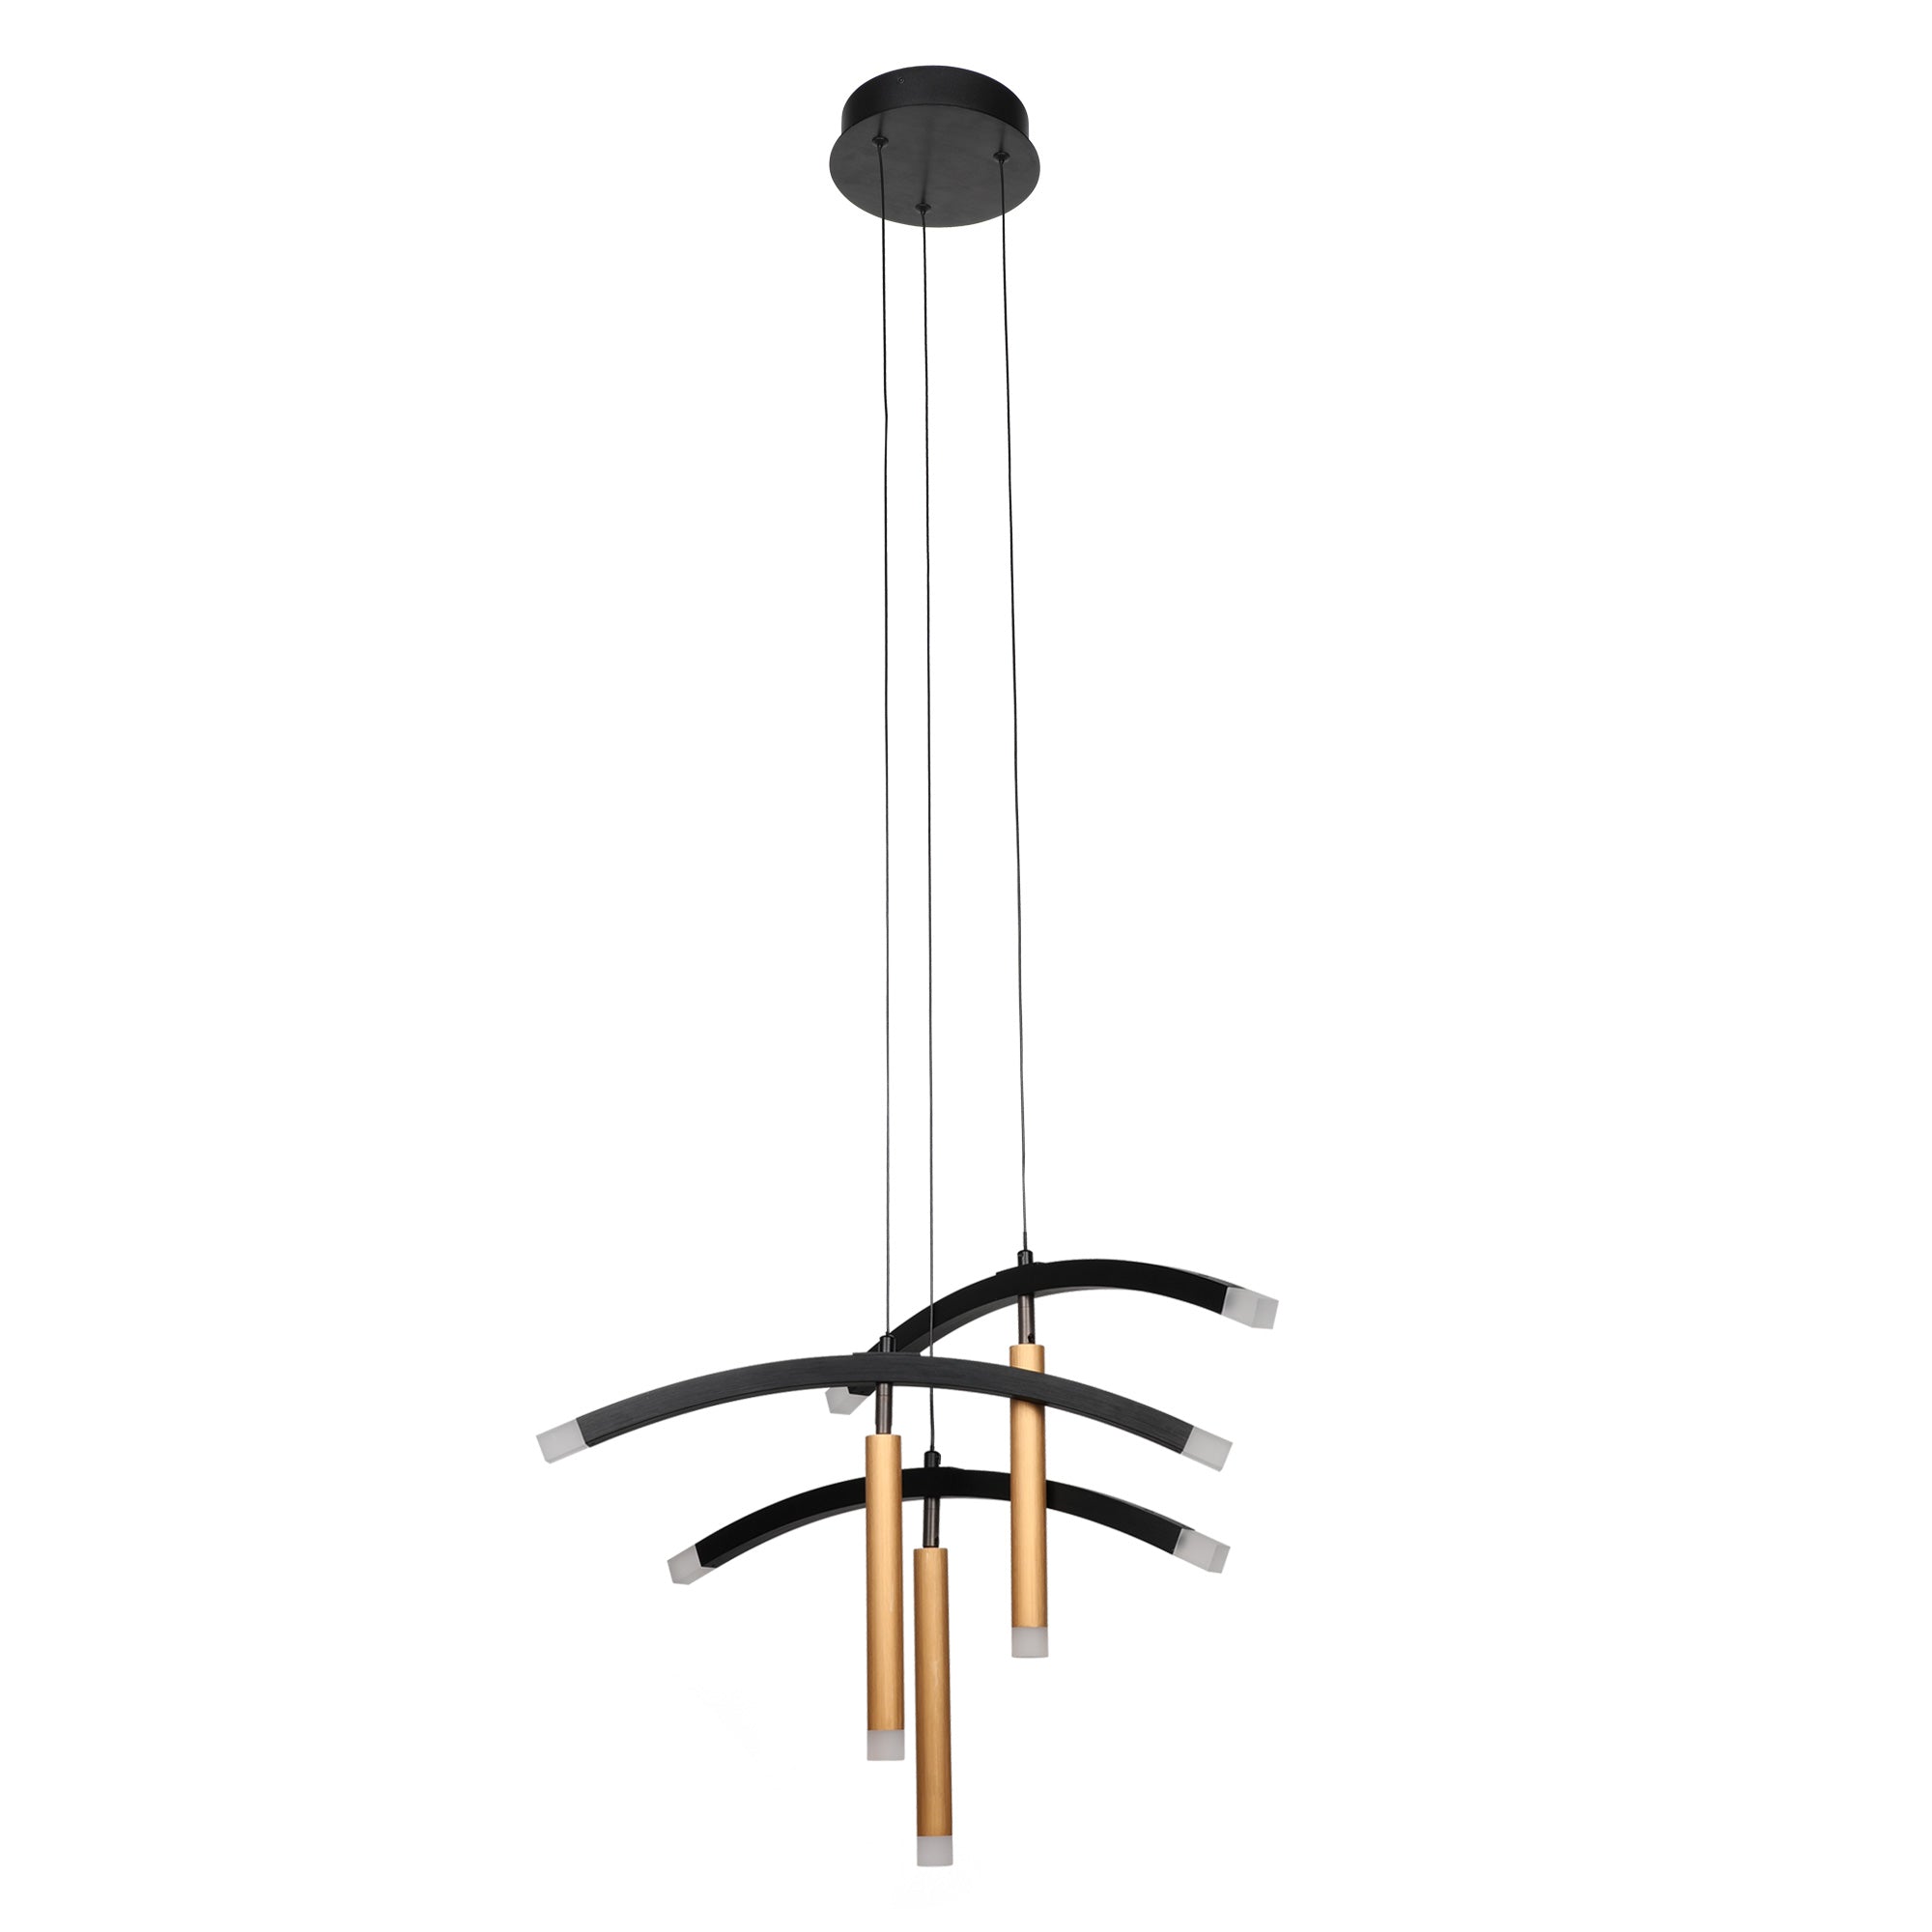 Smafan Seville Modern Decorative Unique Suspending LED Chandelier Pendant Light brings a clean and simple design.Simply streamlined-design pendant light fully demonstrates the art and beauty of simpleness.This pendant showcases a balance of materials and a stylish glow to bring some contemporary flair to its surroundings.It adopts gold and black collocation.